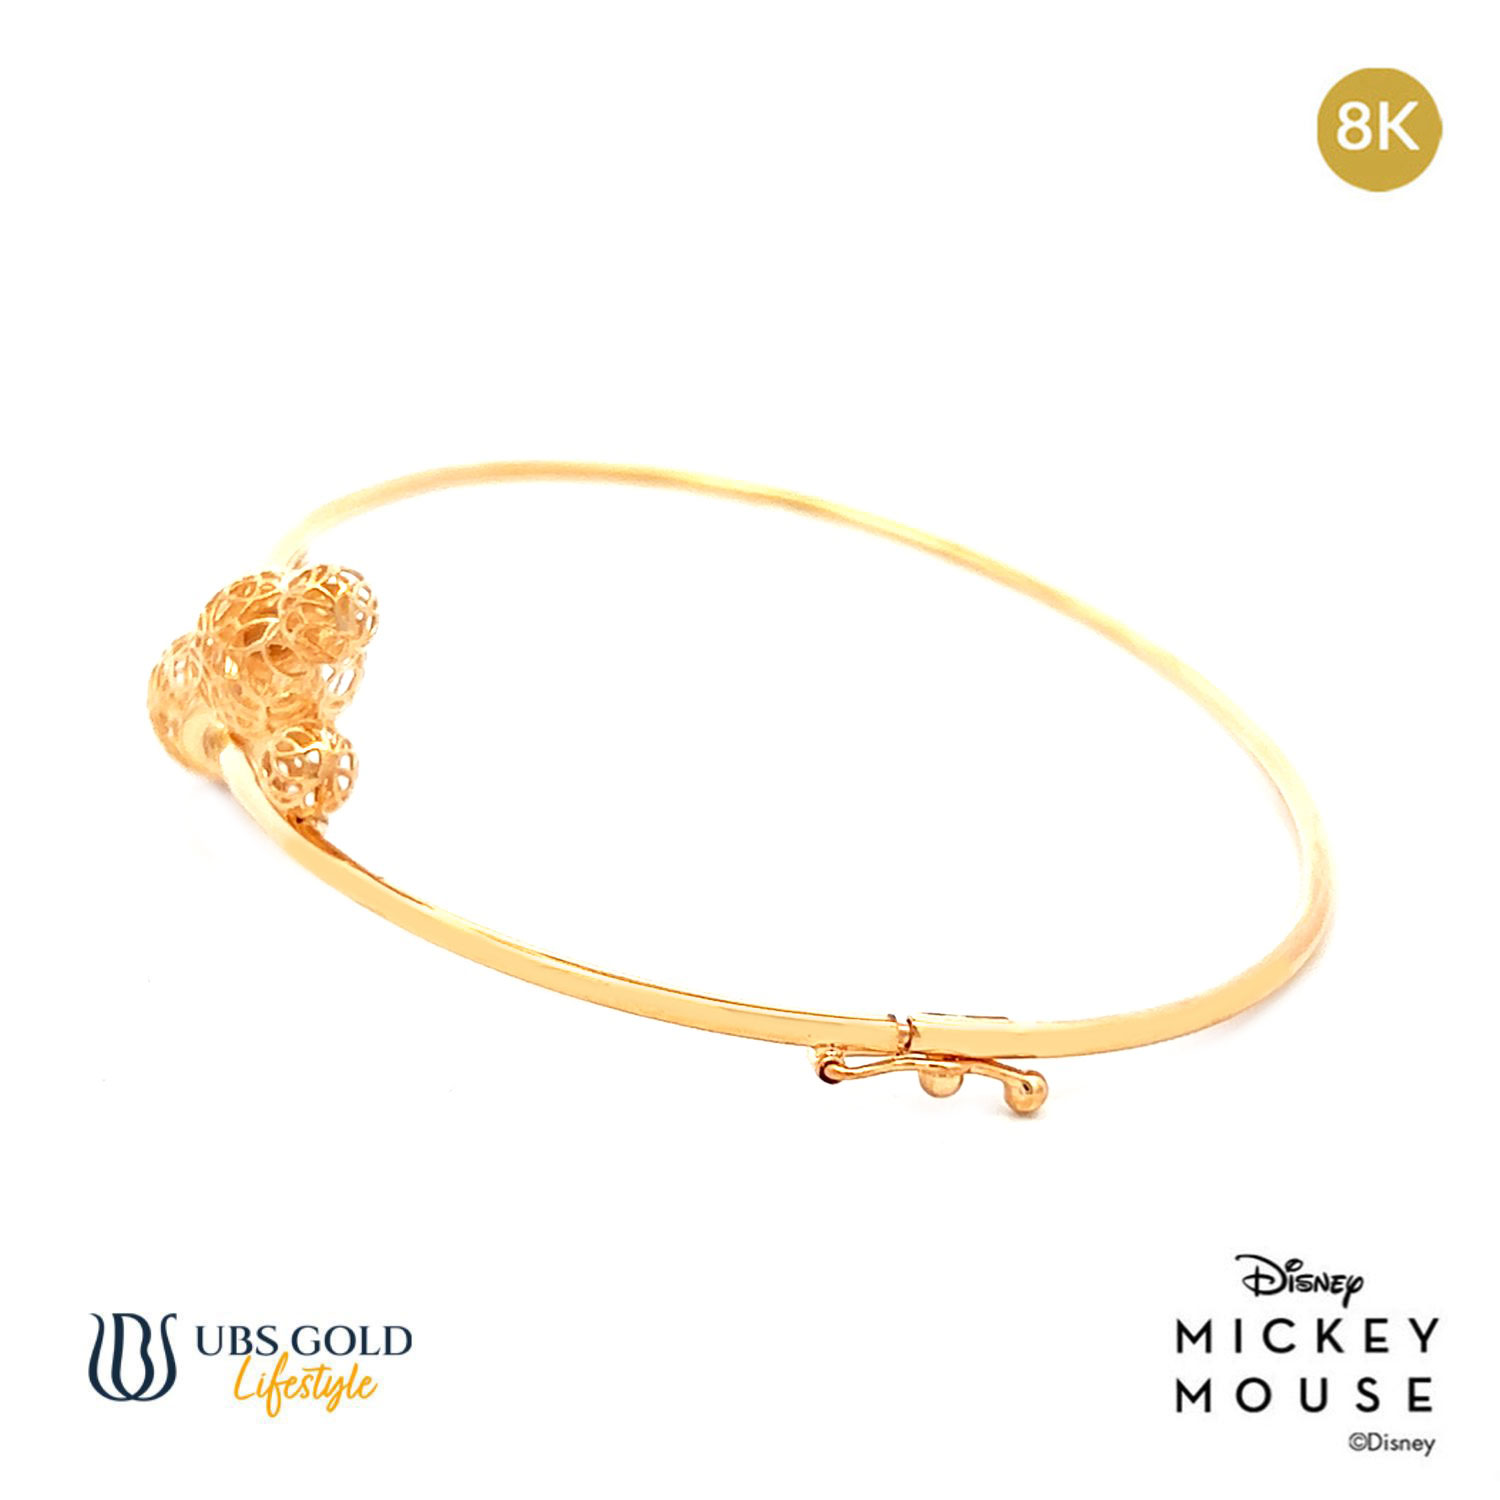 UBS Gold Gelang Emas Disney Mickey Minnie Mouse - Vgy0140K - 8K